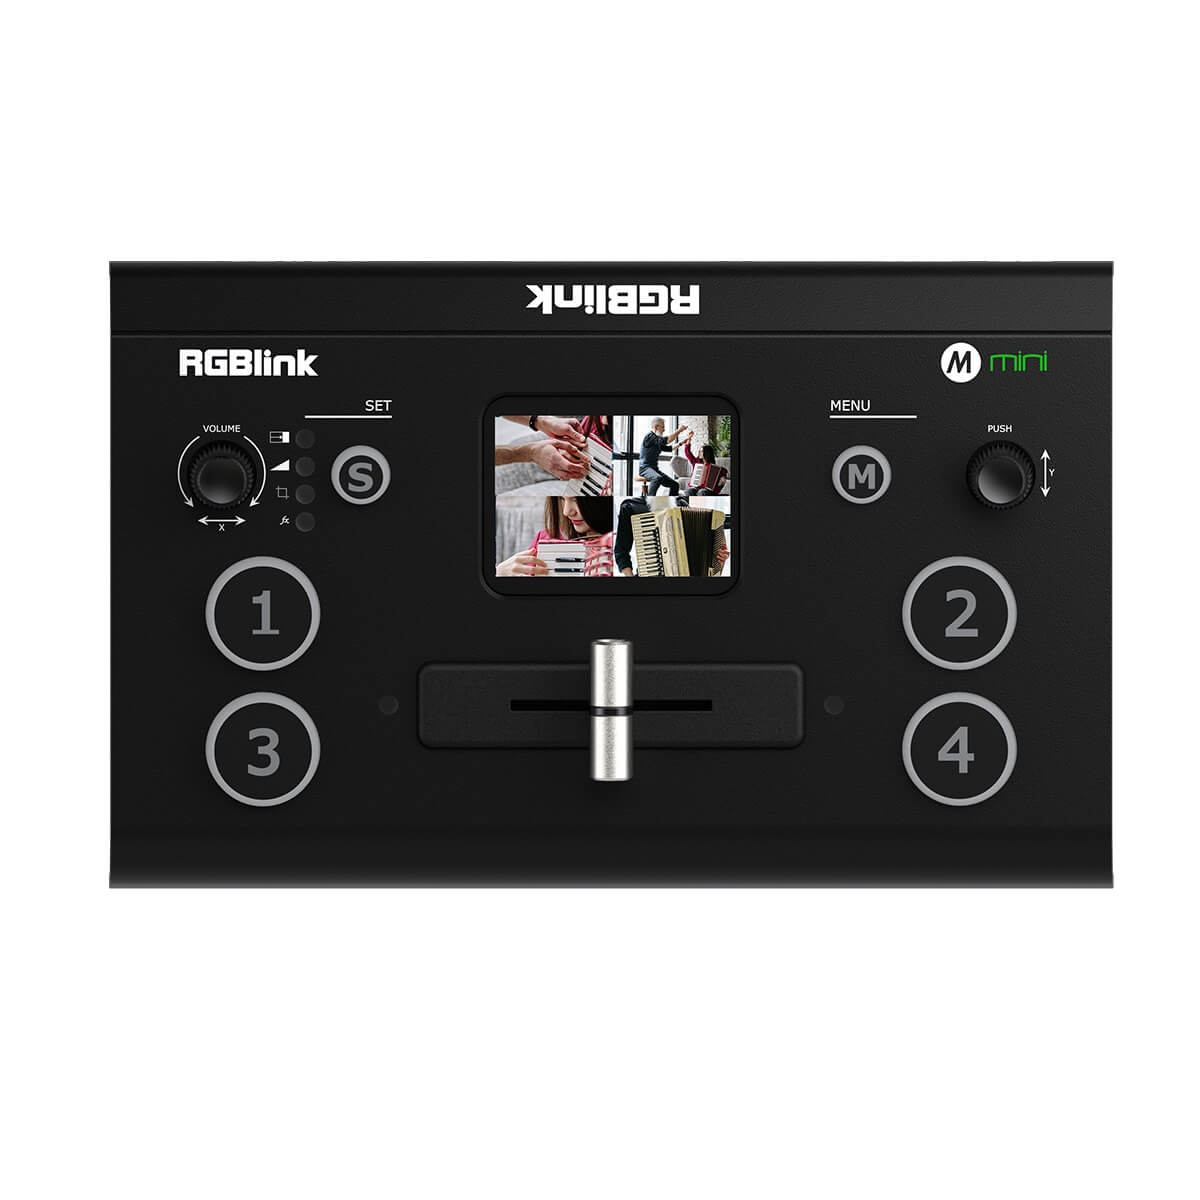 RGBlink mini (gen 2) - Compact Streaming Switcher with 4 HDMI inputs, top